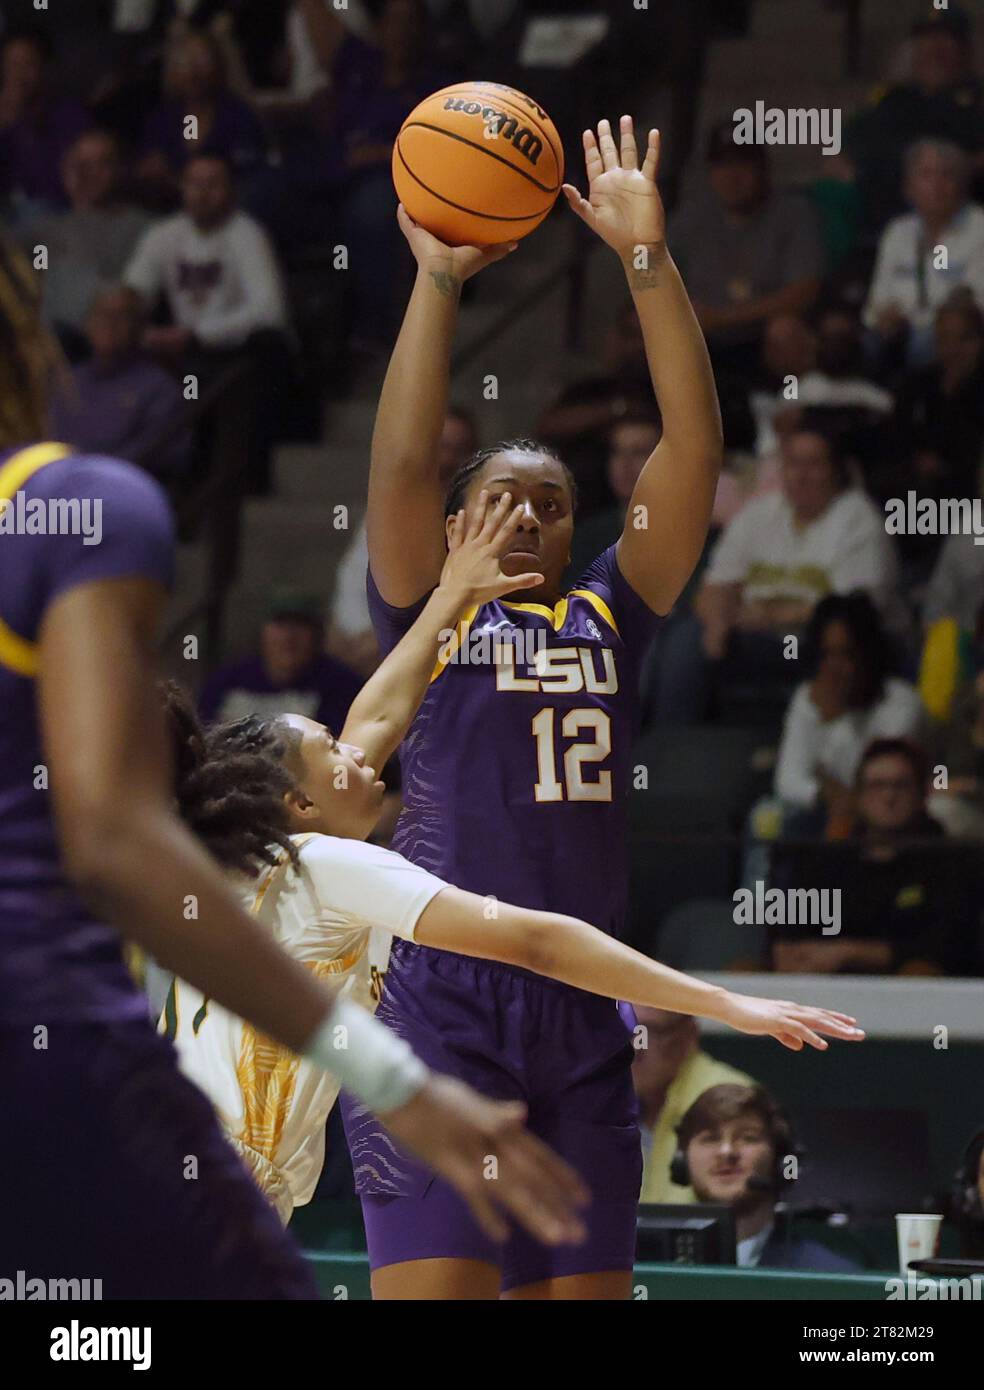 Hammond, USA. 17th Nov, 2023. LSU Lady Tigers guard Mikaylah Williams (12) shoots a three-pointer over SE Louisiana Lady Lions guard Avari Berry (11) during a women's college basketball game at the University Center in Hammond, Louisiana on Friday, November 17, 2023. (Photo by Peter G. Forest/Sipa USA) Credit: Sipa USA/Alamy Live News Stock Photo